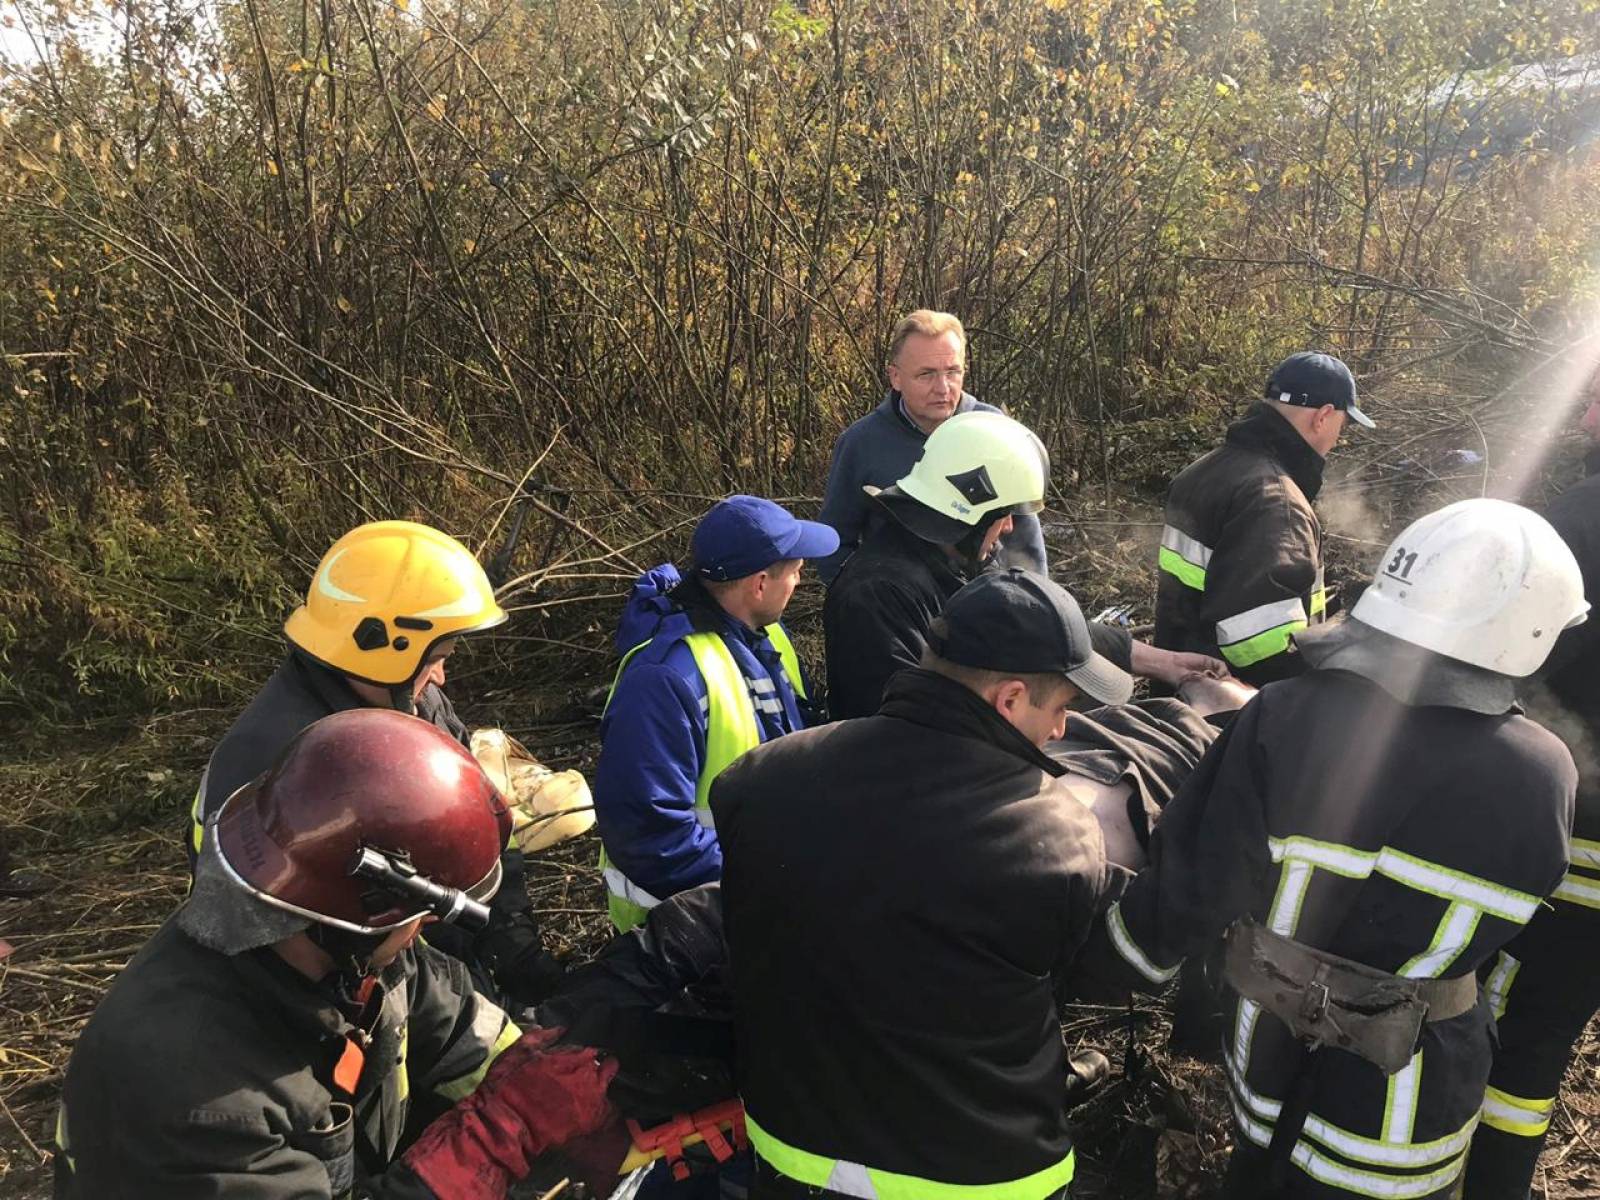 Members of emergency services evacuate a wounded person at the site of the Antonov-12 cargo airplane emergency landing in Lviv region